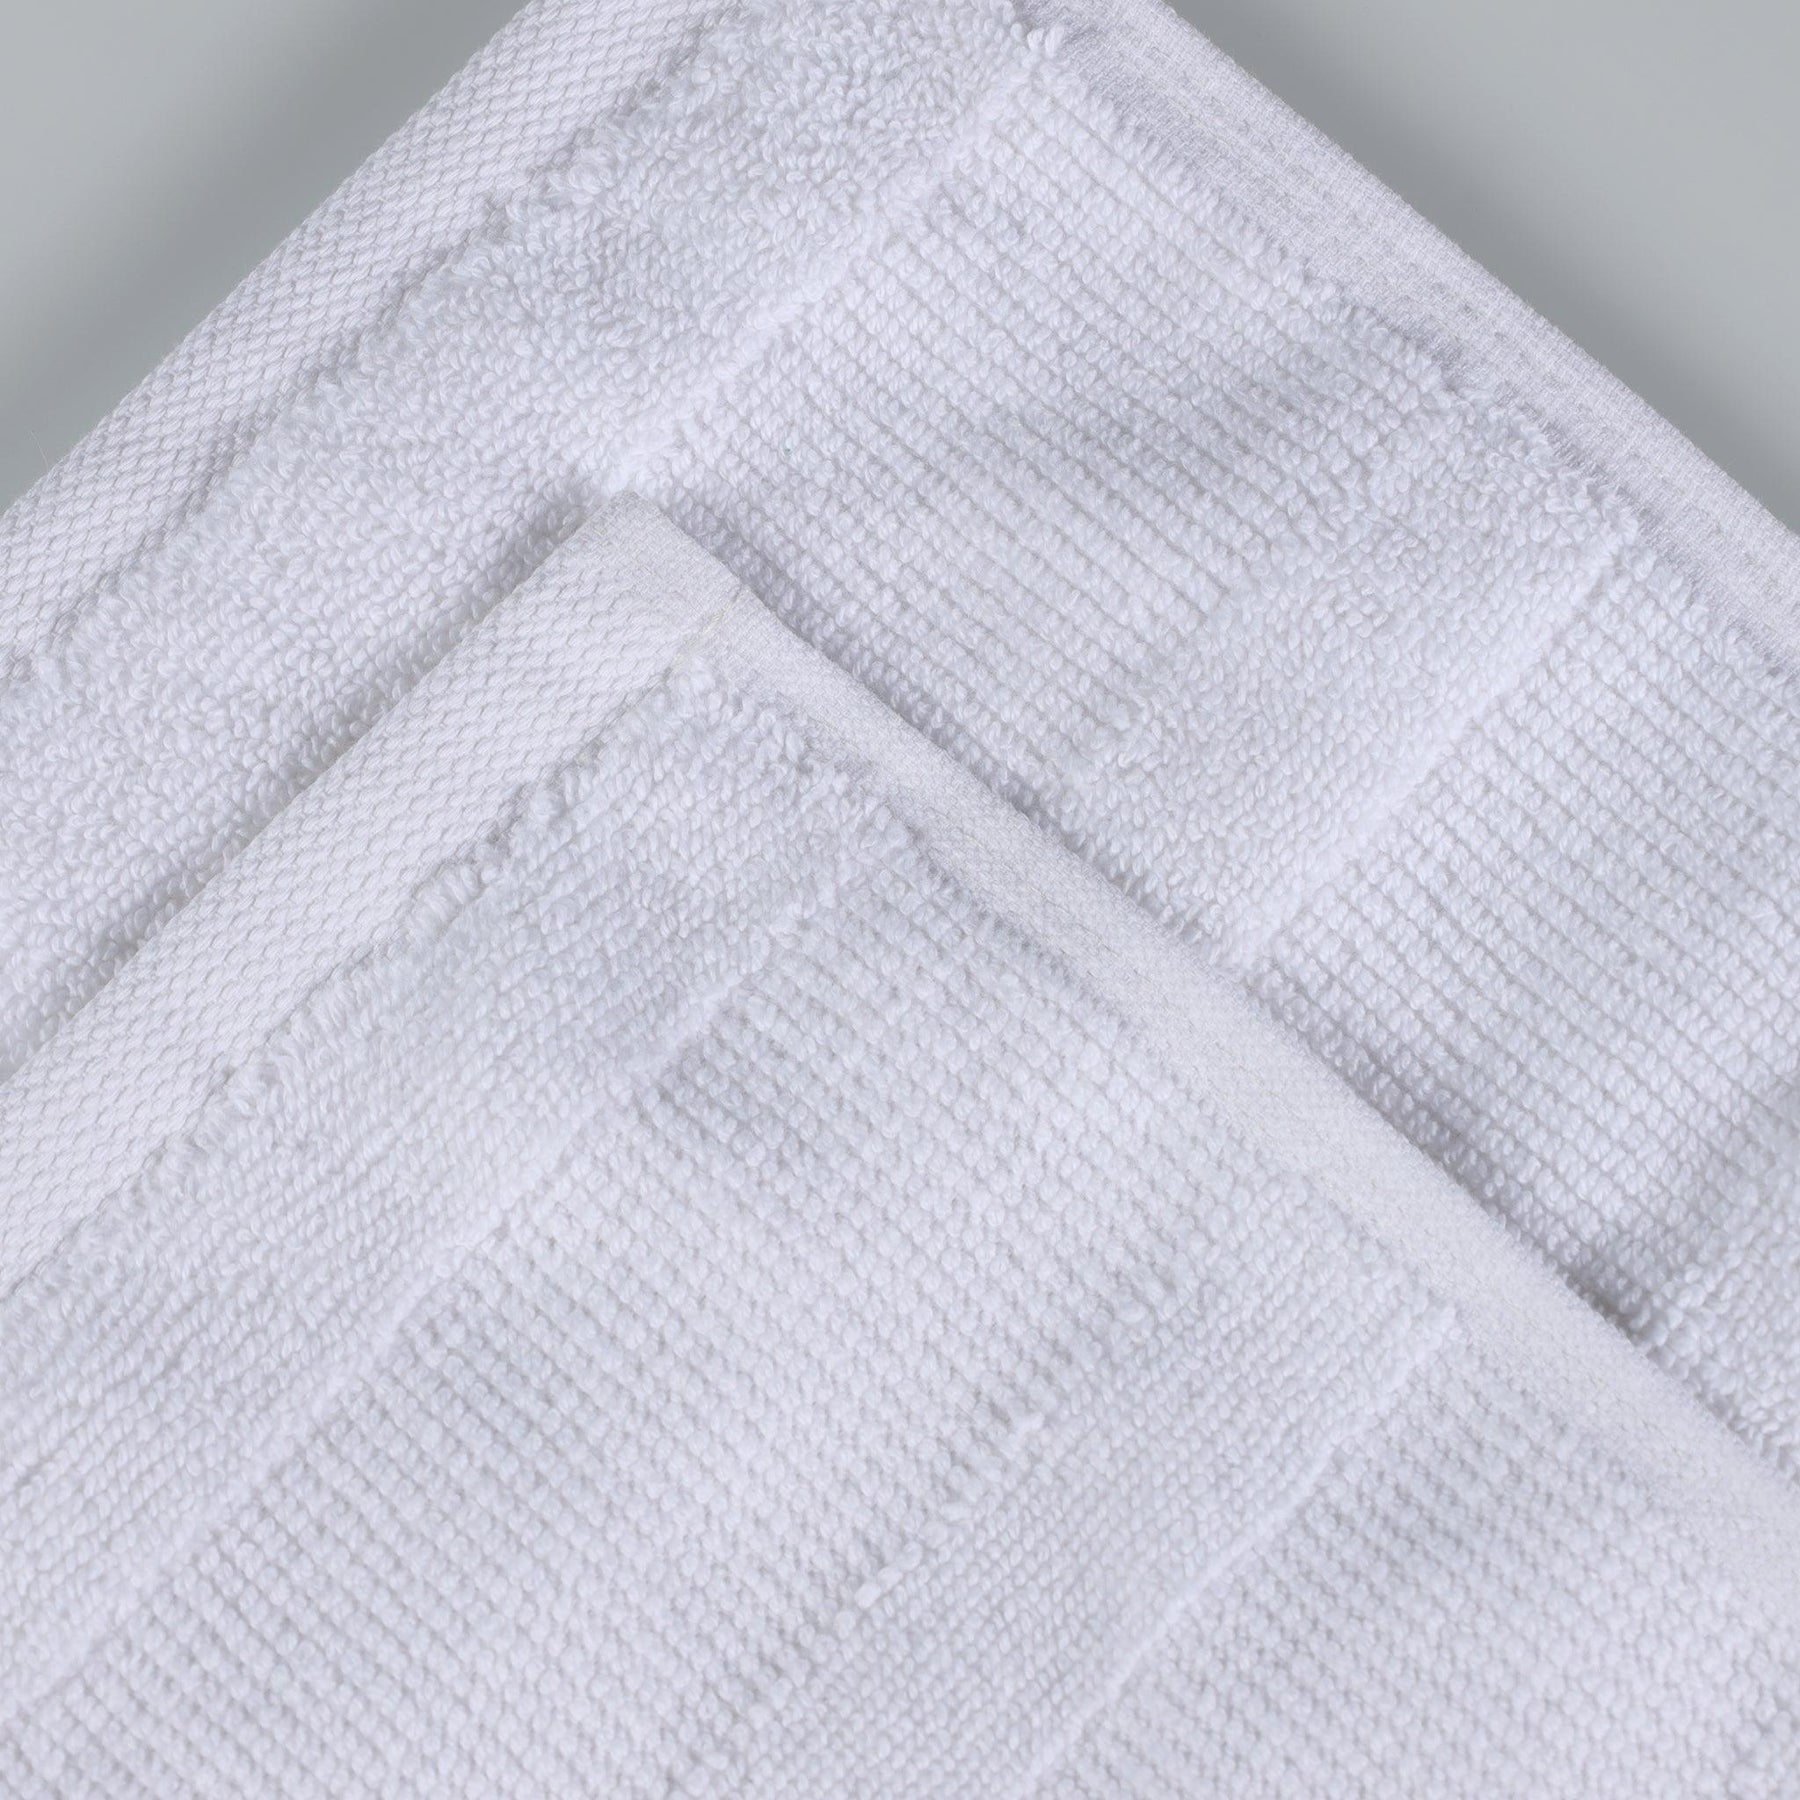 Ribbed Turkish Cotton 3-Piece Solid Quick-Dry Assorted Highly Absorbent Towel Set - White